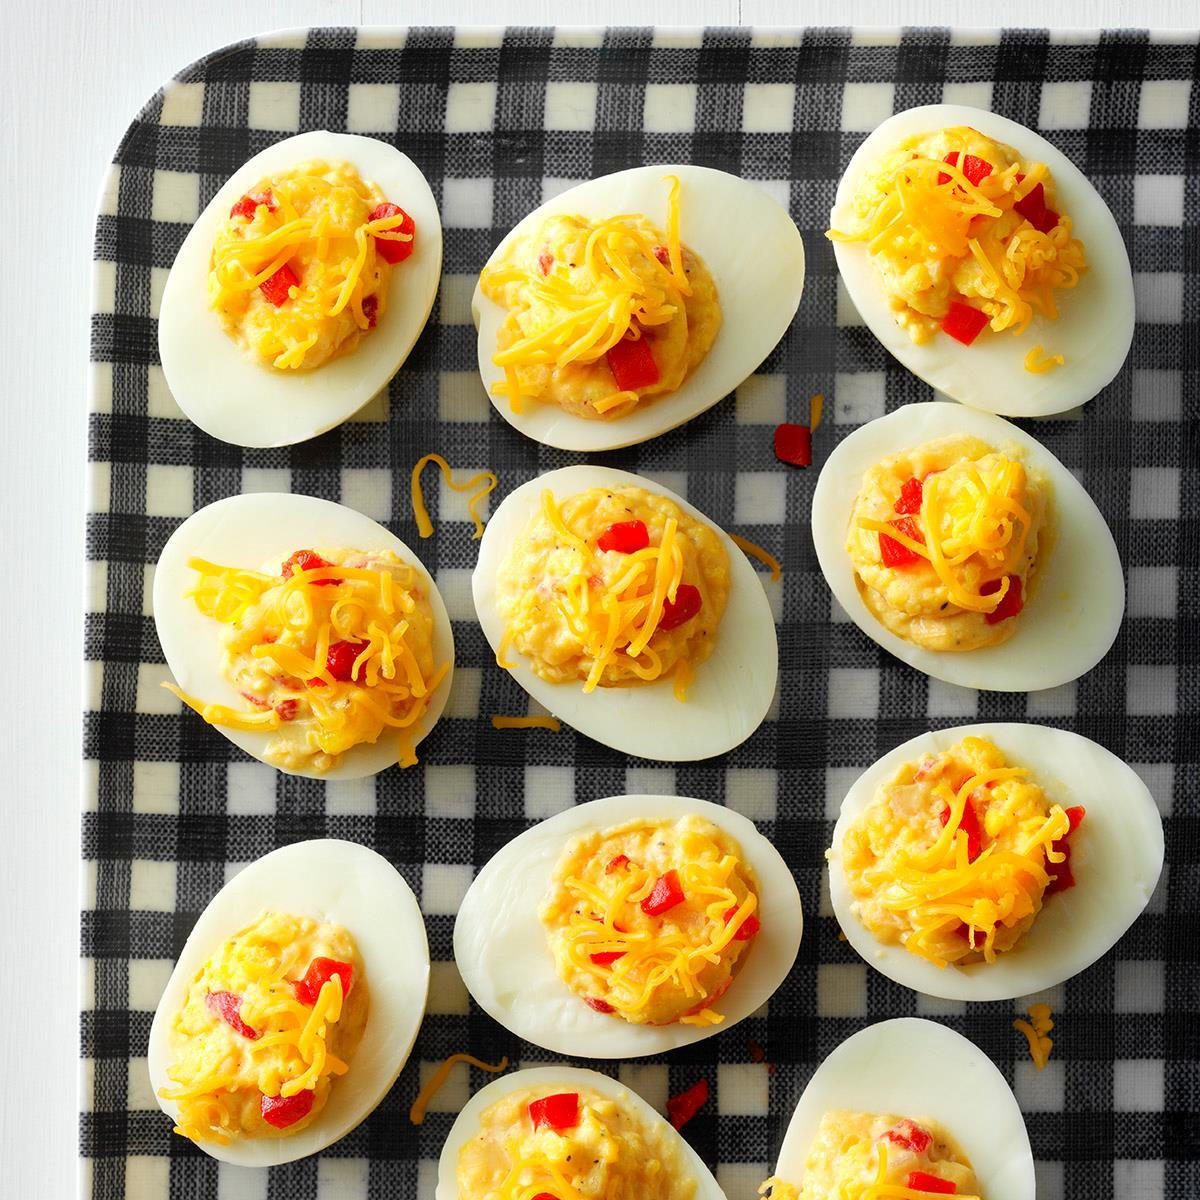 https://www.tasteofhome.com/wp-content/uploads/2018/01/Sweet-Onion-Pimiento-Cheese-Deviled-Eggs_EXPS_CPLBZ19_53100_E11_01_2b-1.jpg?fit=700%2C1024